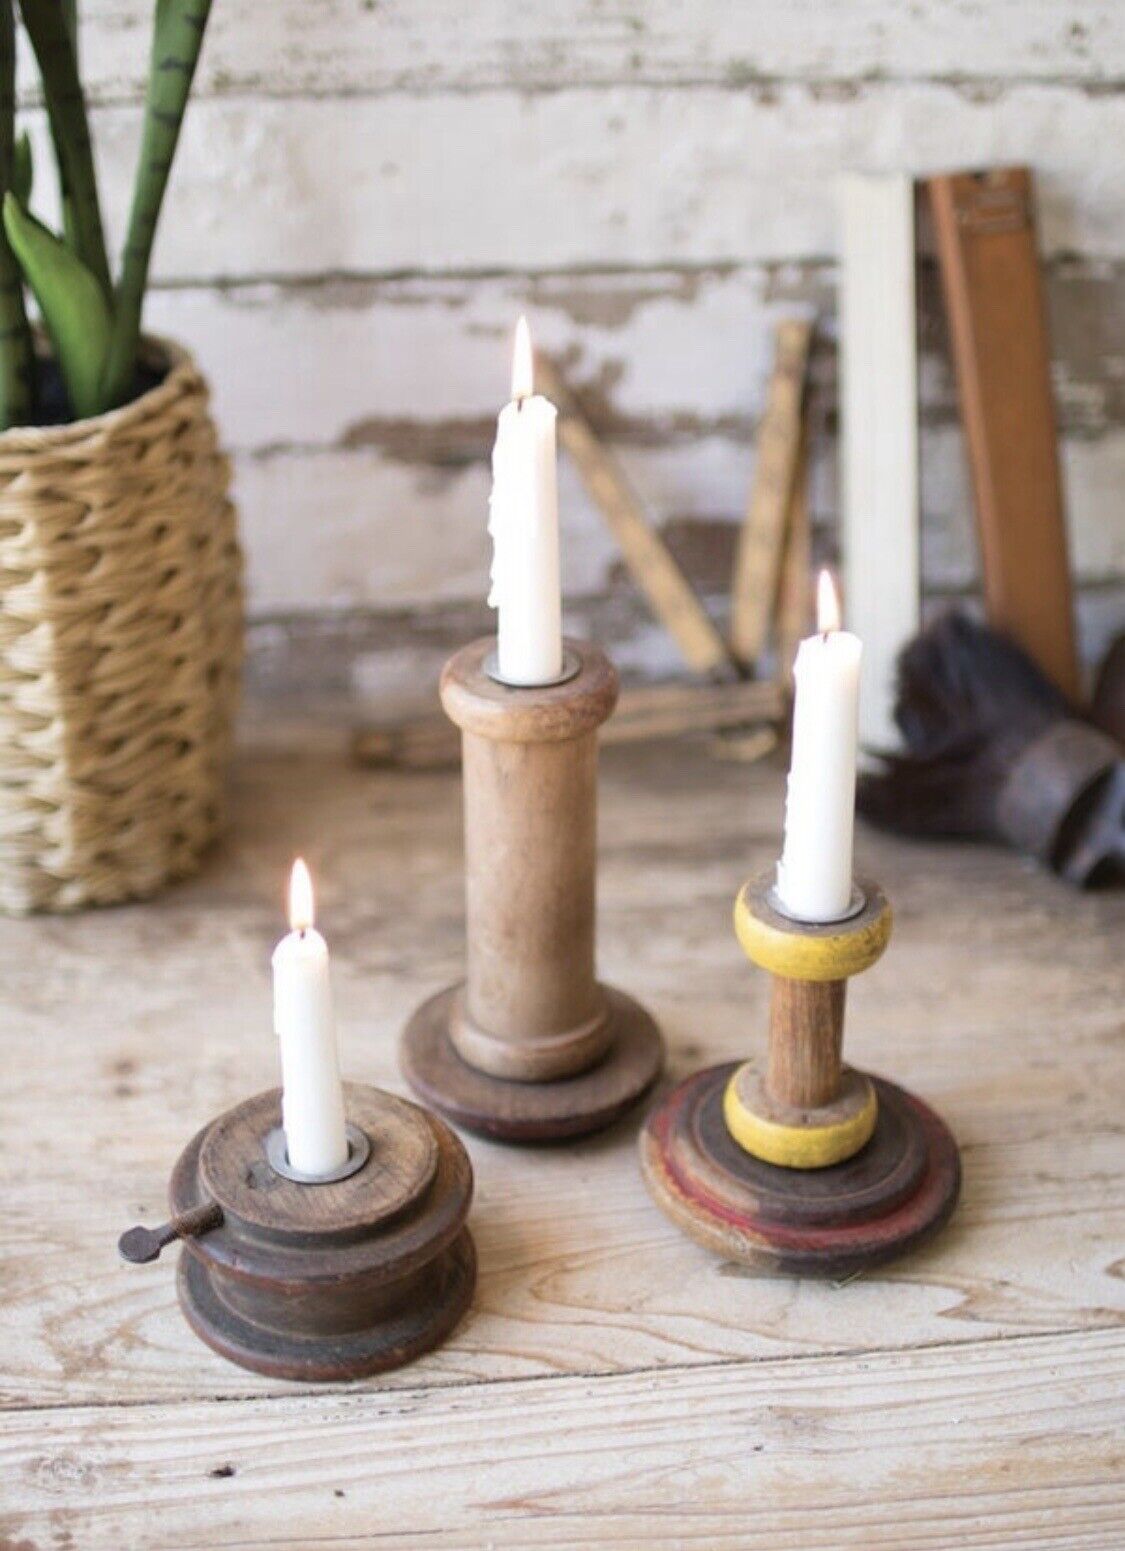 NWT Wooden Spool Candle Holders - Set Of 3 - by Kalalou